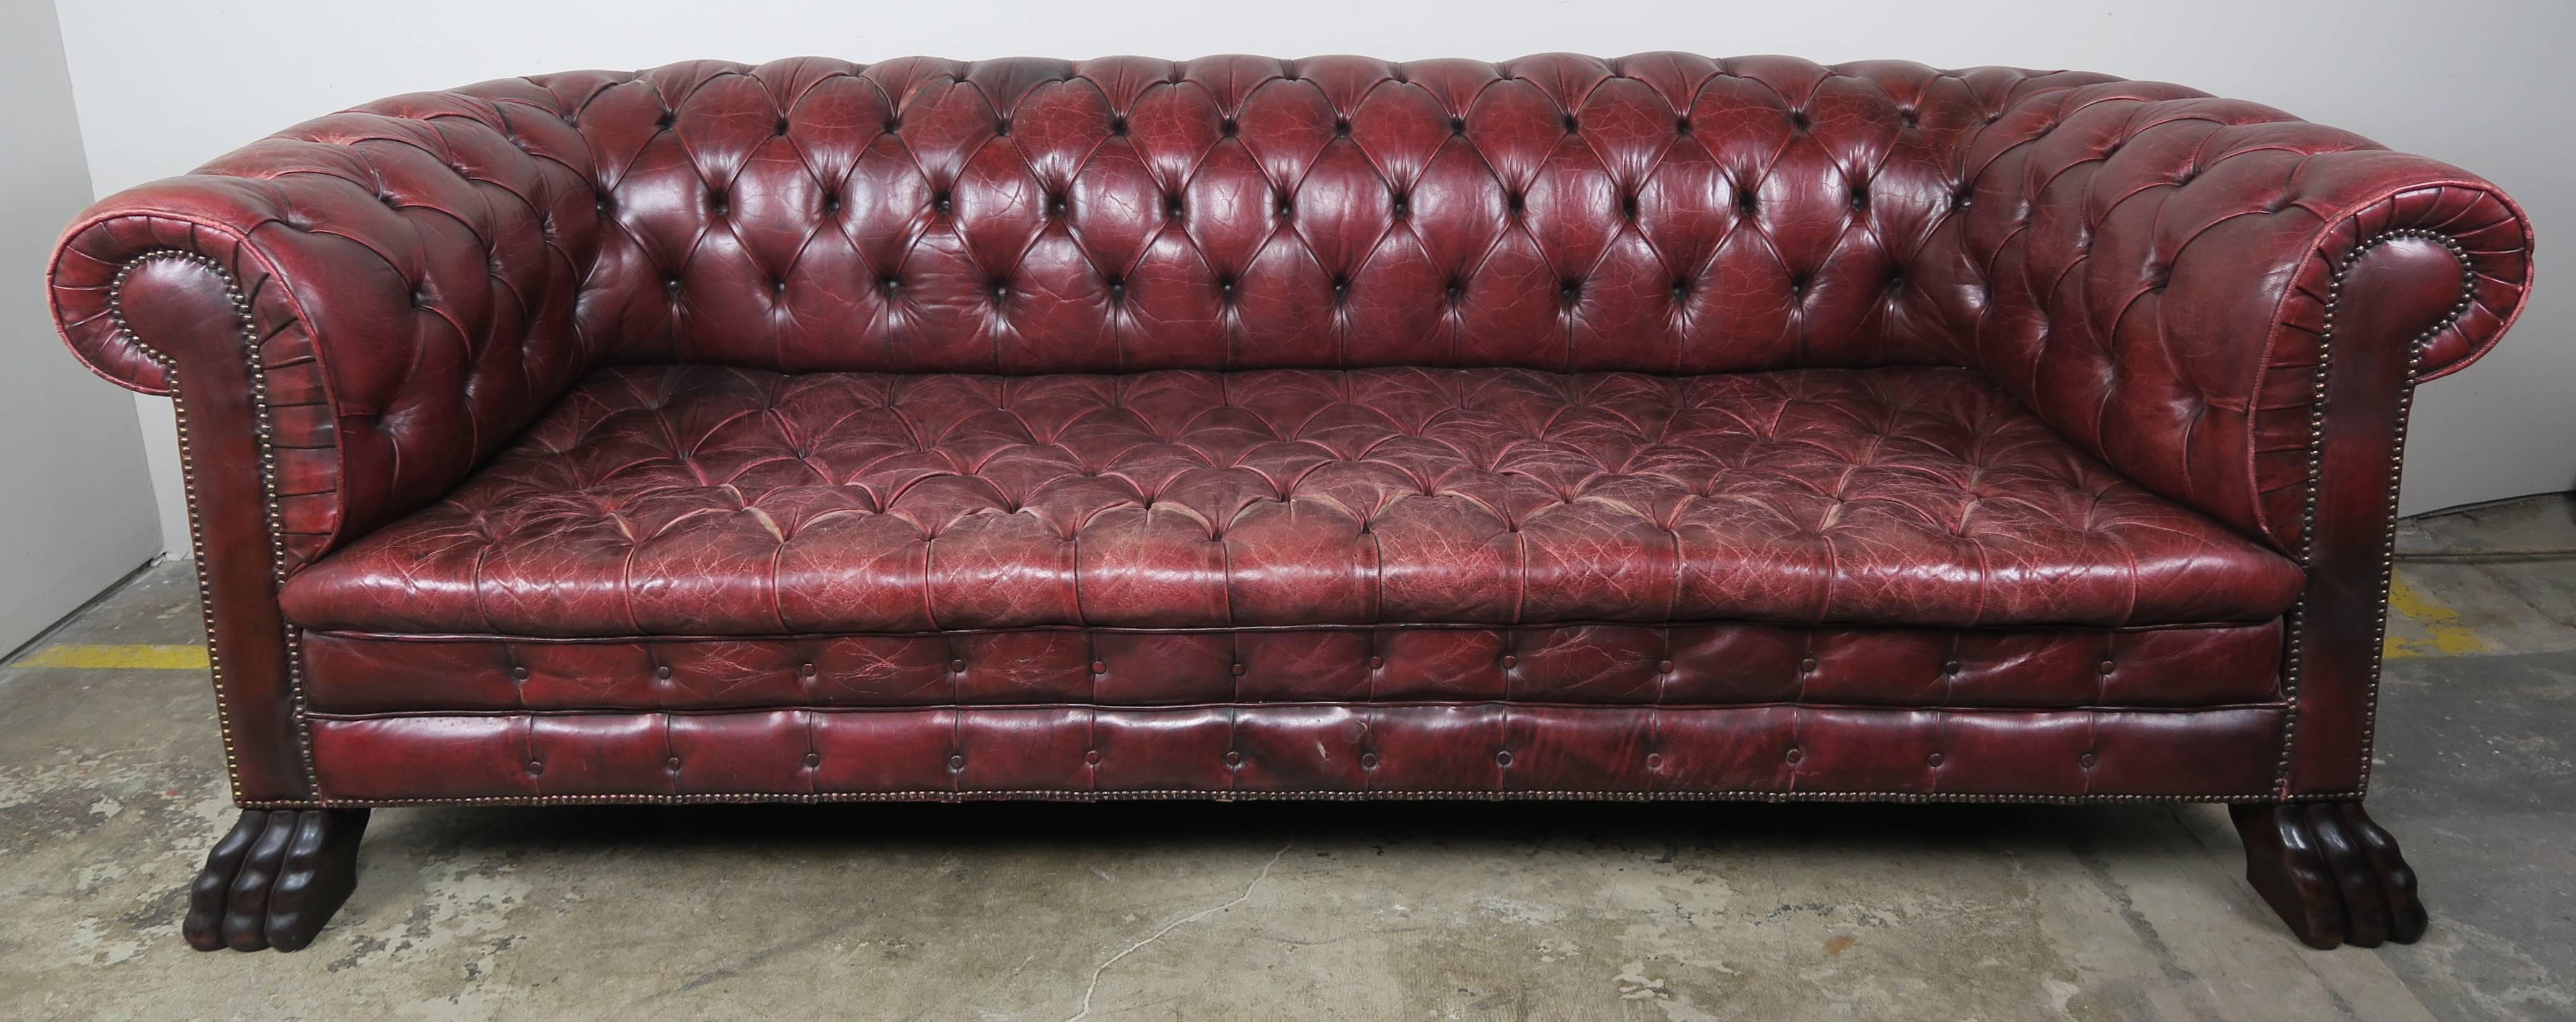 English leather tufted Chesterfield style sofa with hand-carved wood lion's feet and nailhead trim detail. The leather is all original to the Classic style sofa that was made in the early 1900s and still has the original horsehair upholstery. The